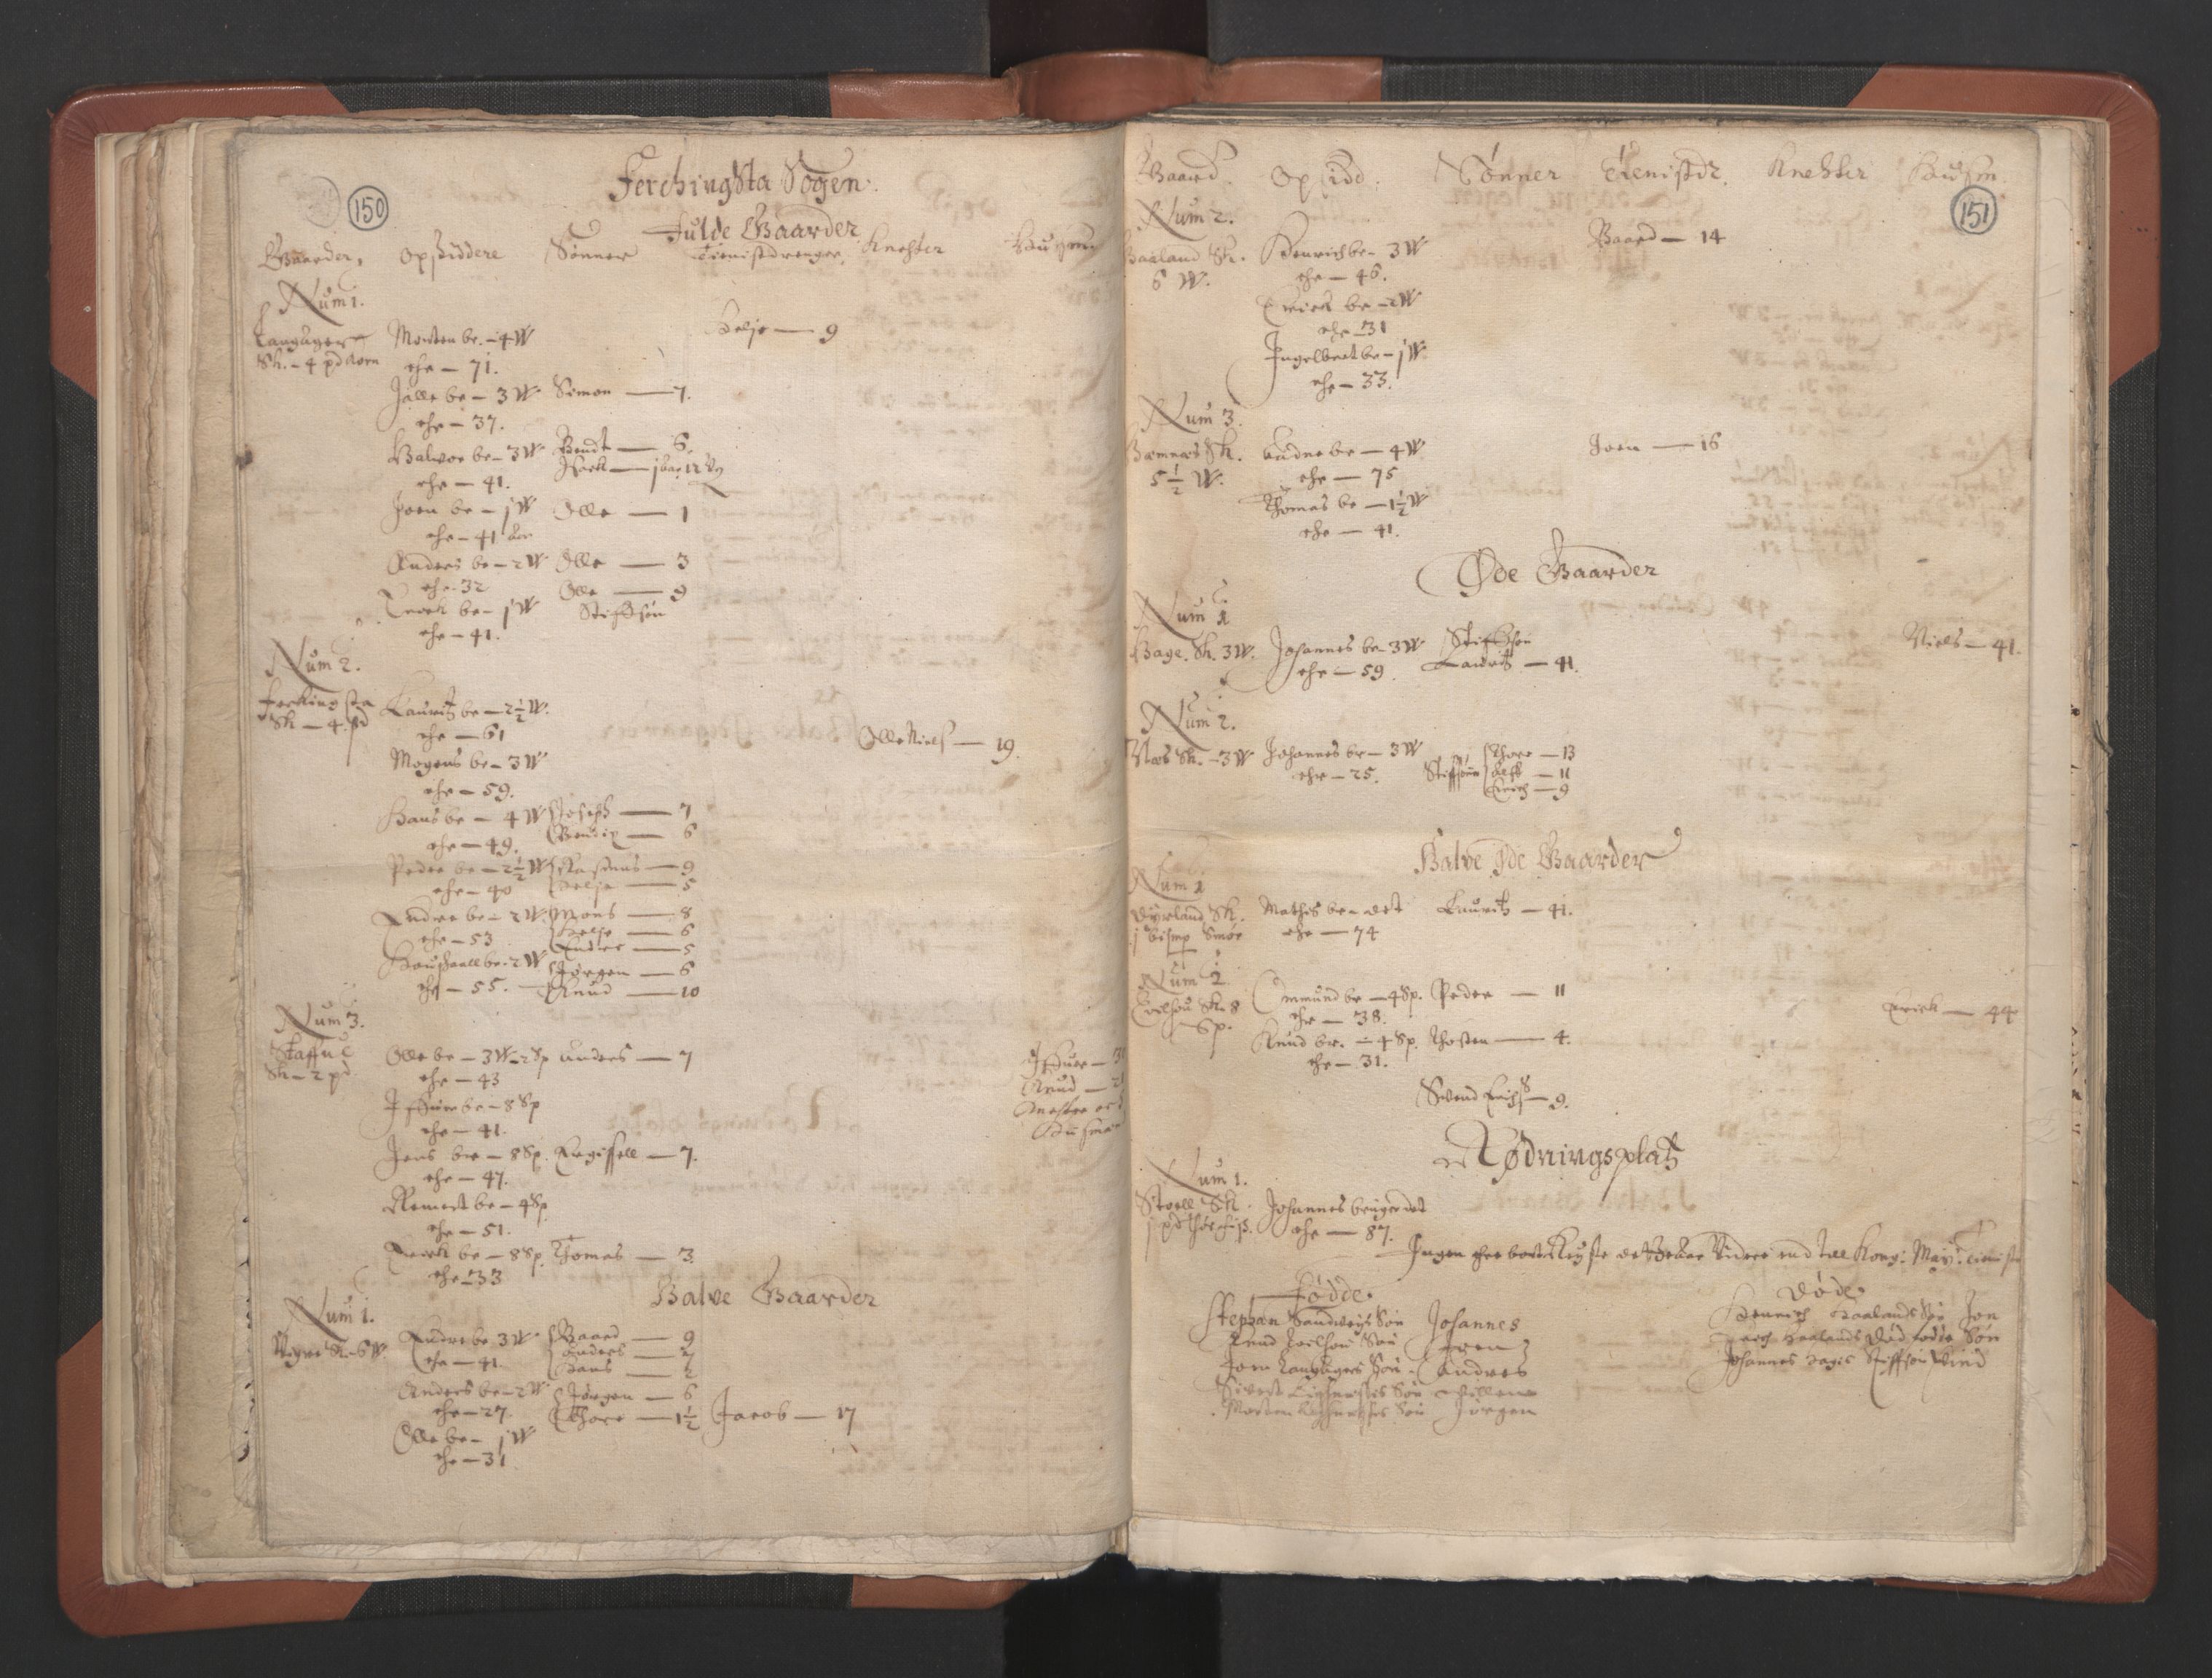 RA, Vicar's Census 1664-1666, no. 18: Stavanger deanery and Karmsund deanery, 1664-1666, p. 150-151